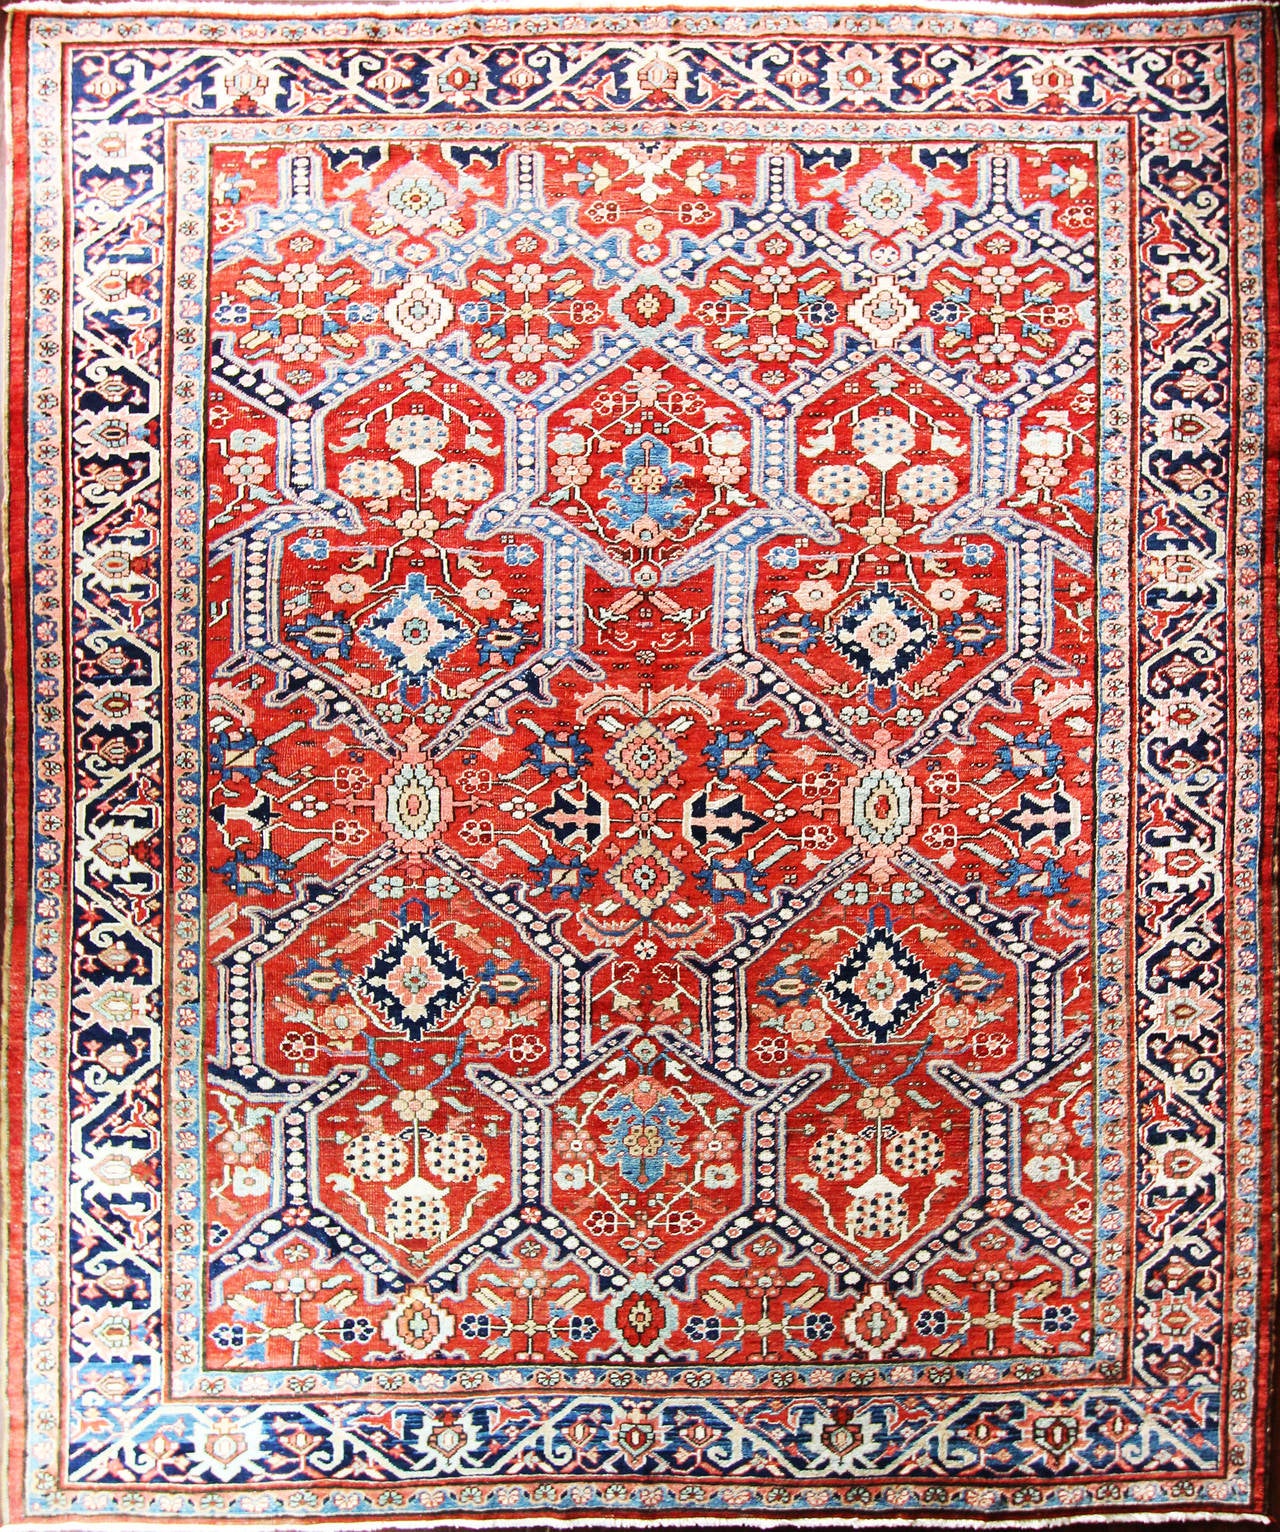 The madder red field with unusual all-over design featuring bold poly chrome palmettos linked in a trellis by blue dragon-like motifs, all within a wide deep blue flower-head and leaf main border. This rug consist of central medallions surrounded by